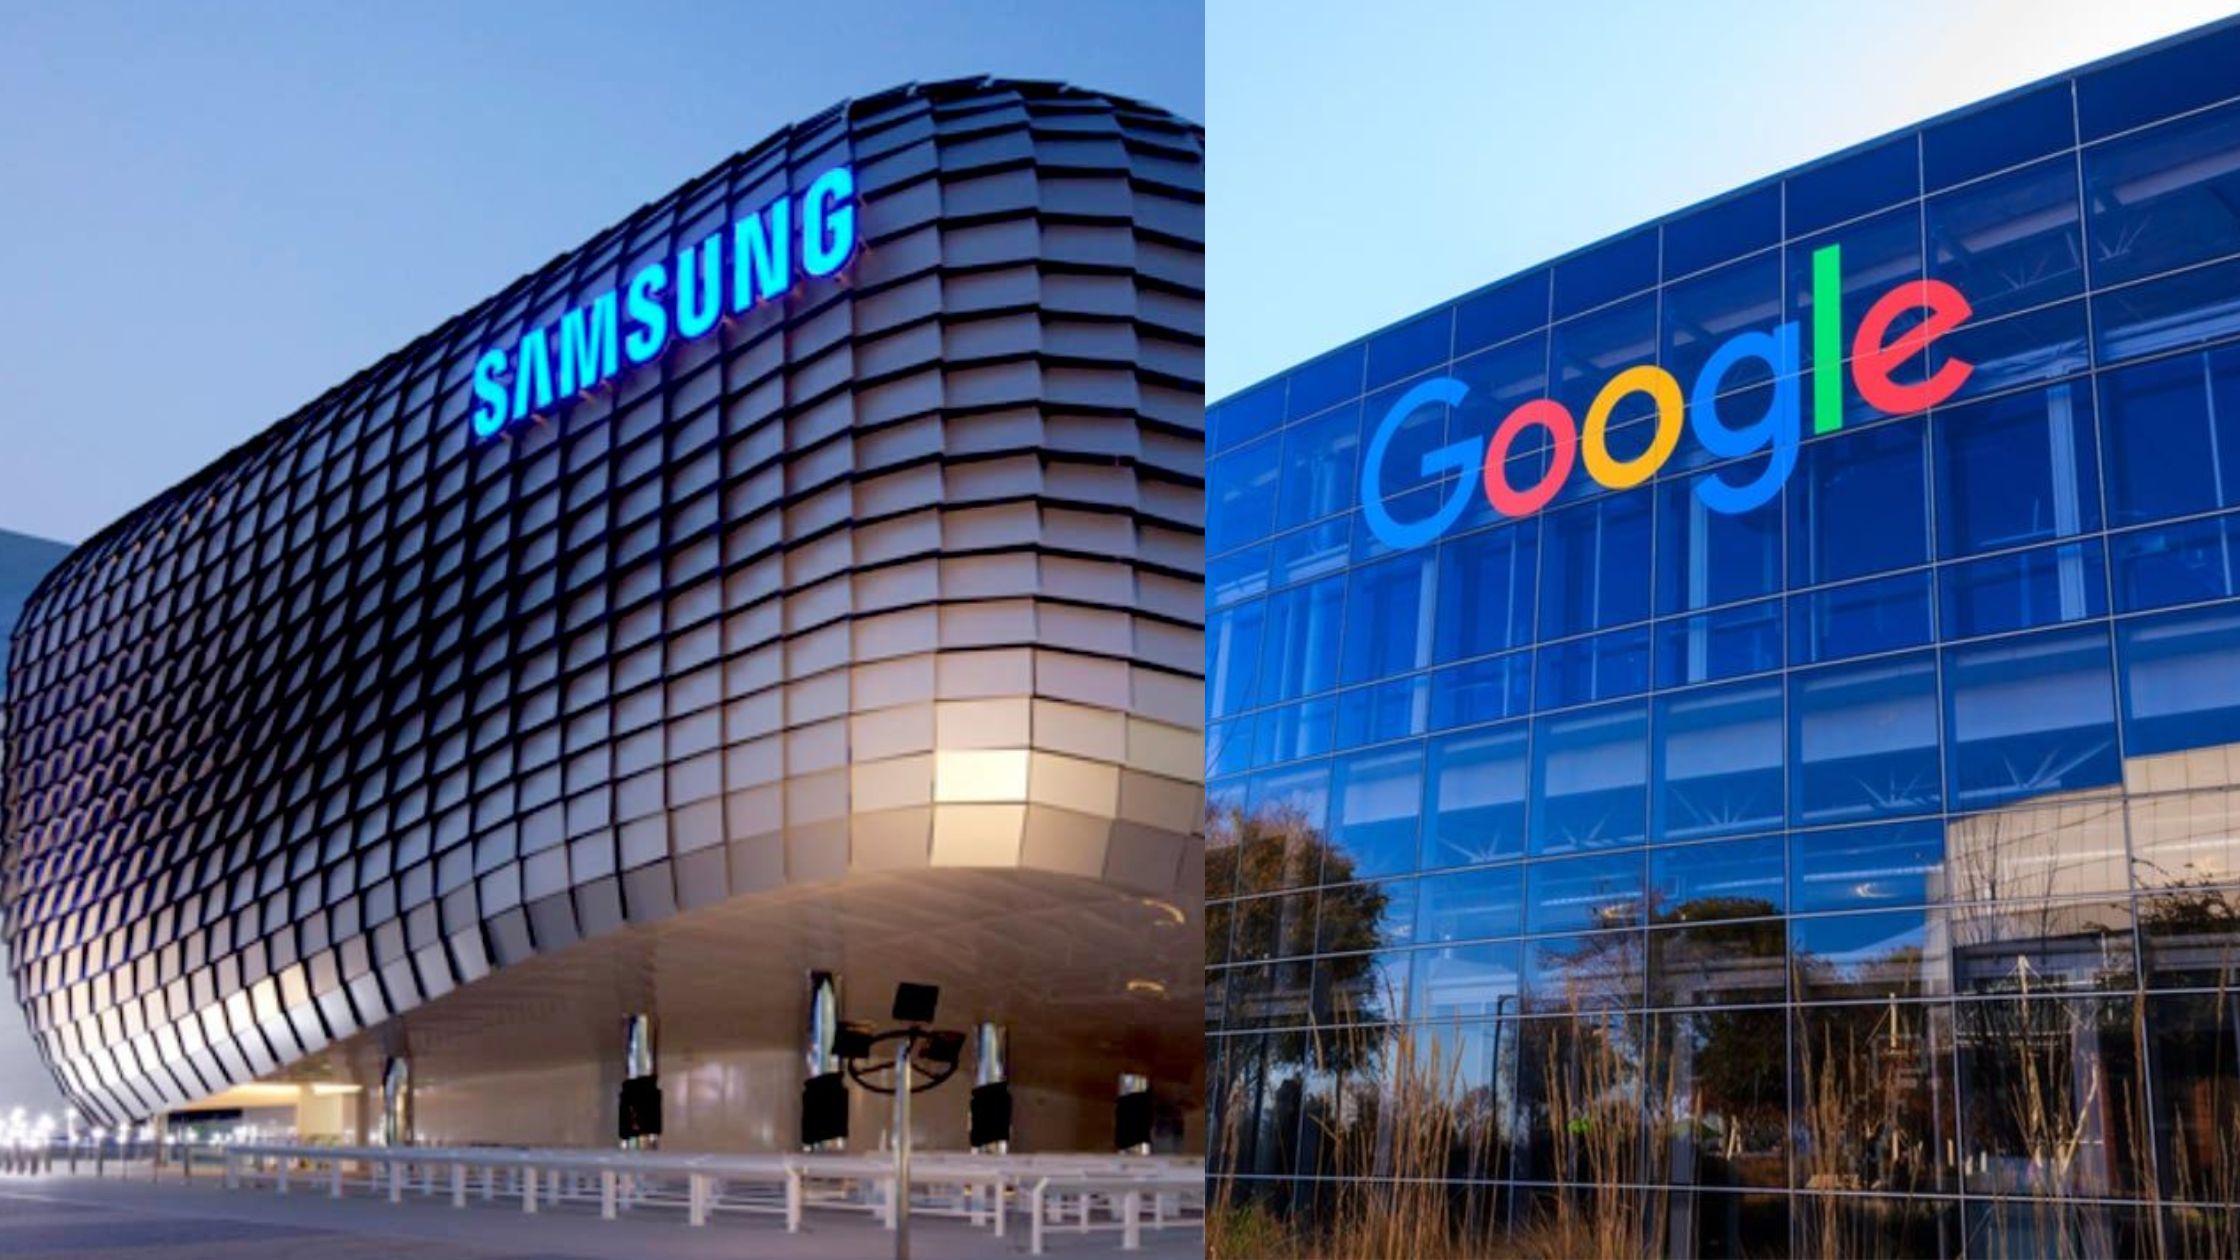 Iit Patna Students Have Job Offers From Samsung And Google